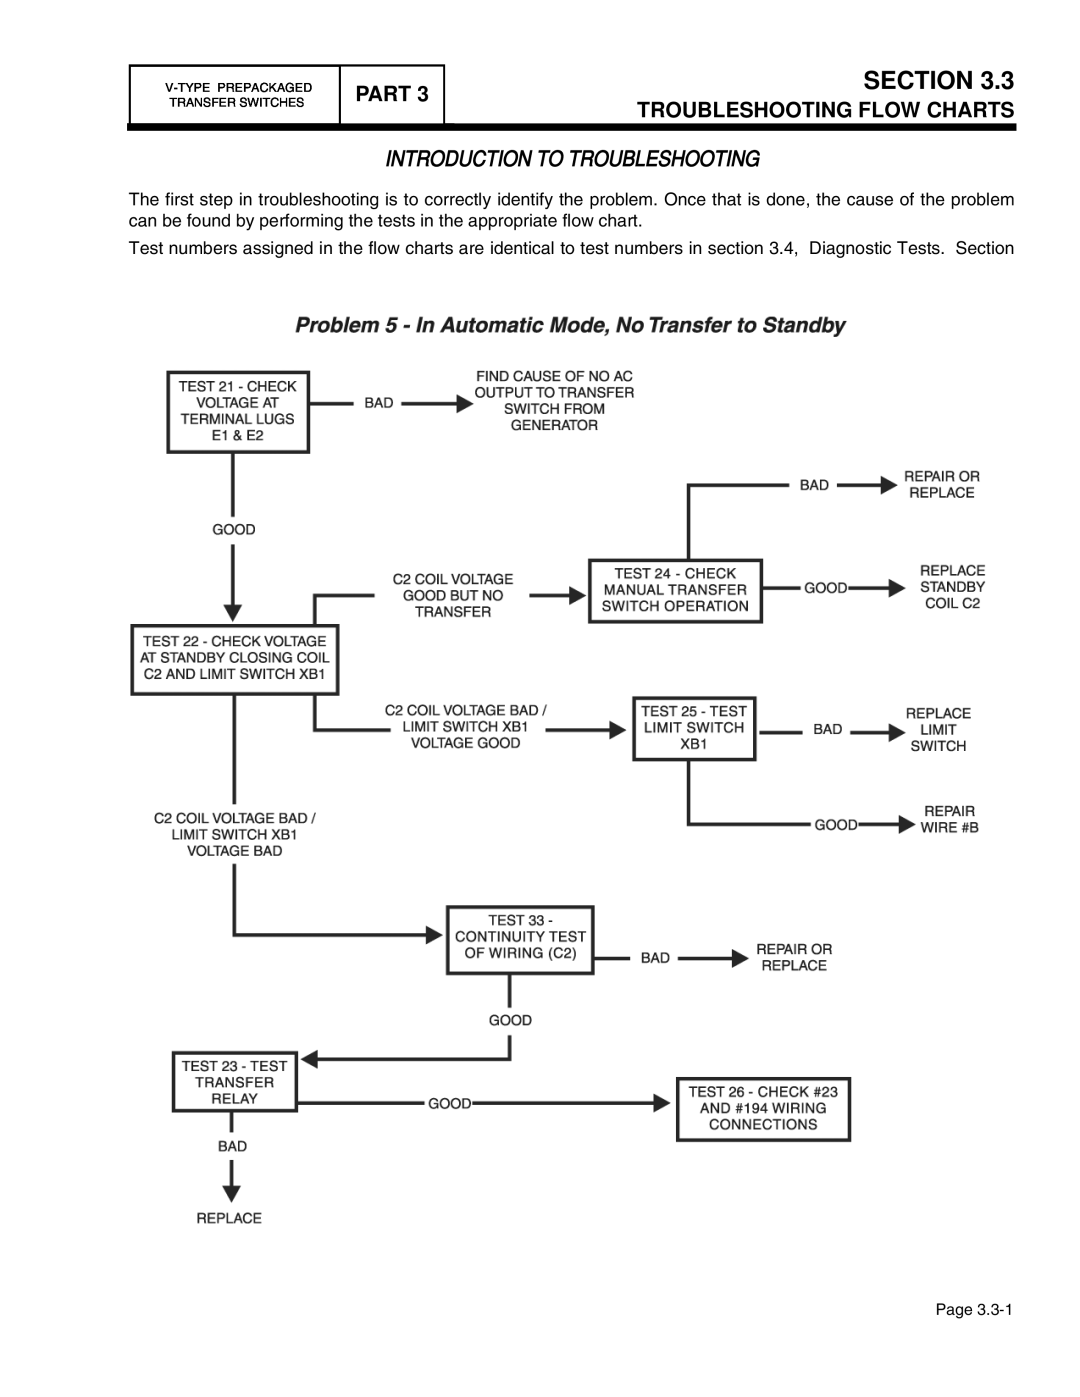 Guardian Technologies 4456, 4390, 4389, 4760 Troubleshooting Flow Charts, Introduction To Troubleshooting, Section, Part 